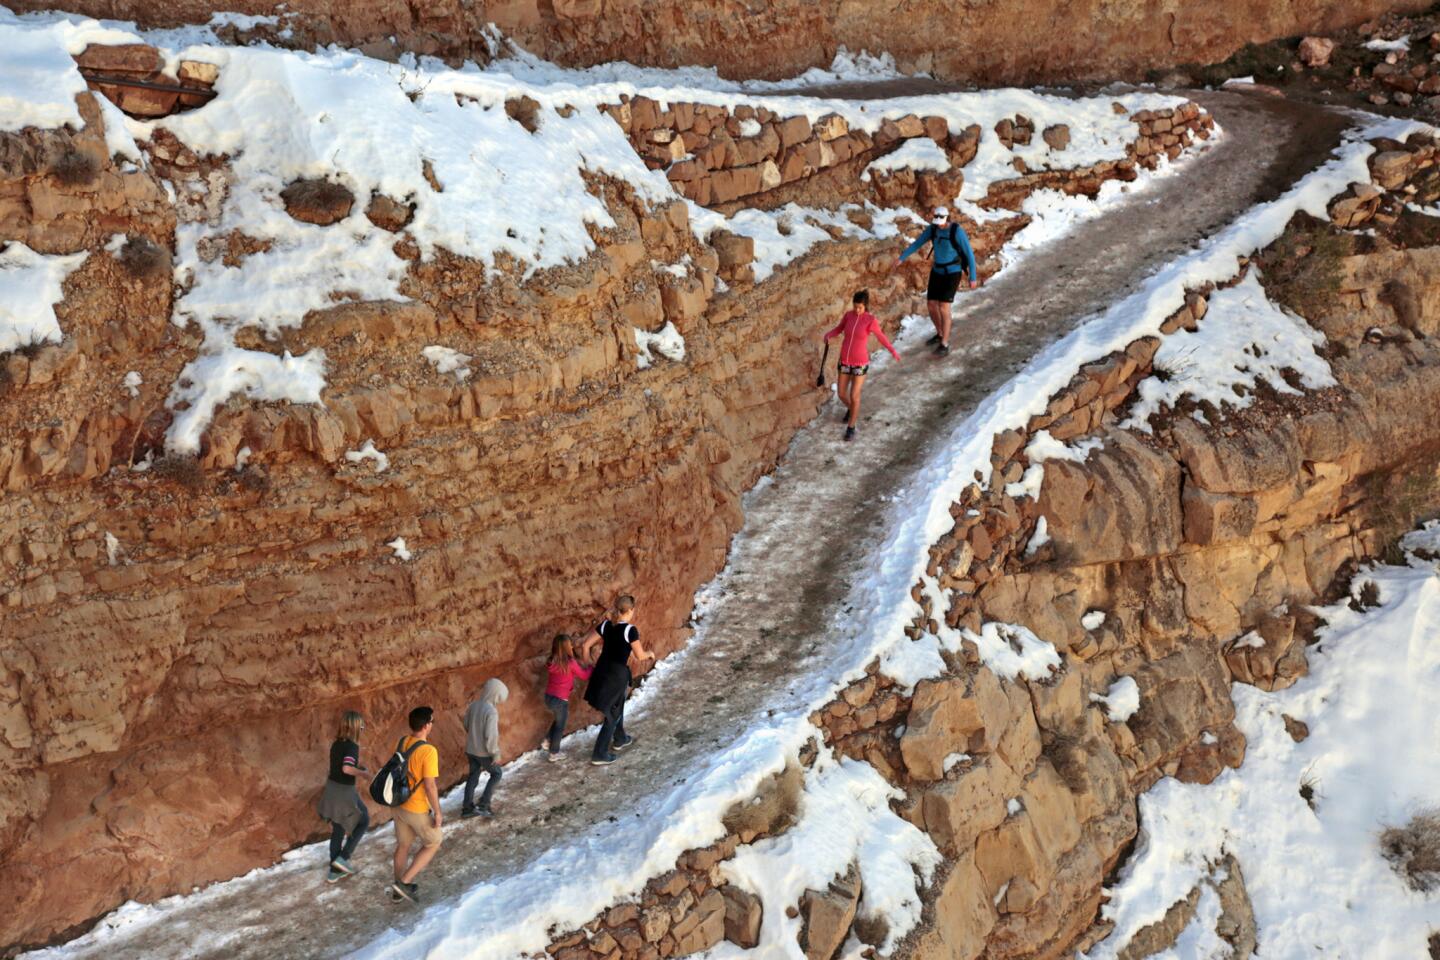 Snow and ice cover a switchback along the South Kaibab Trail on March 10, 2015.